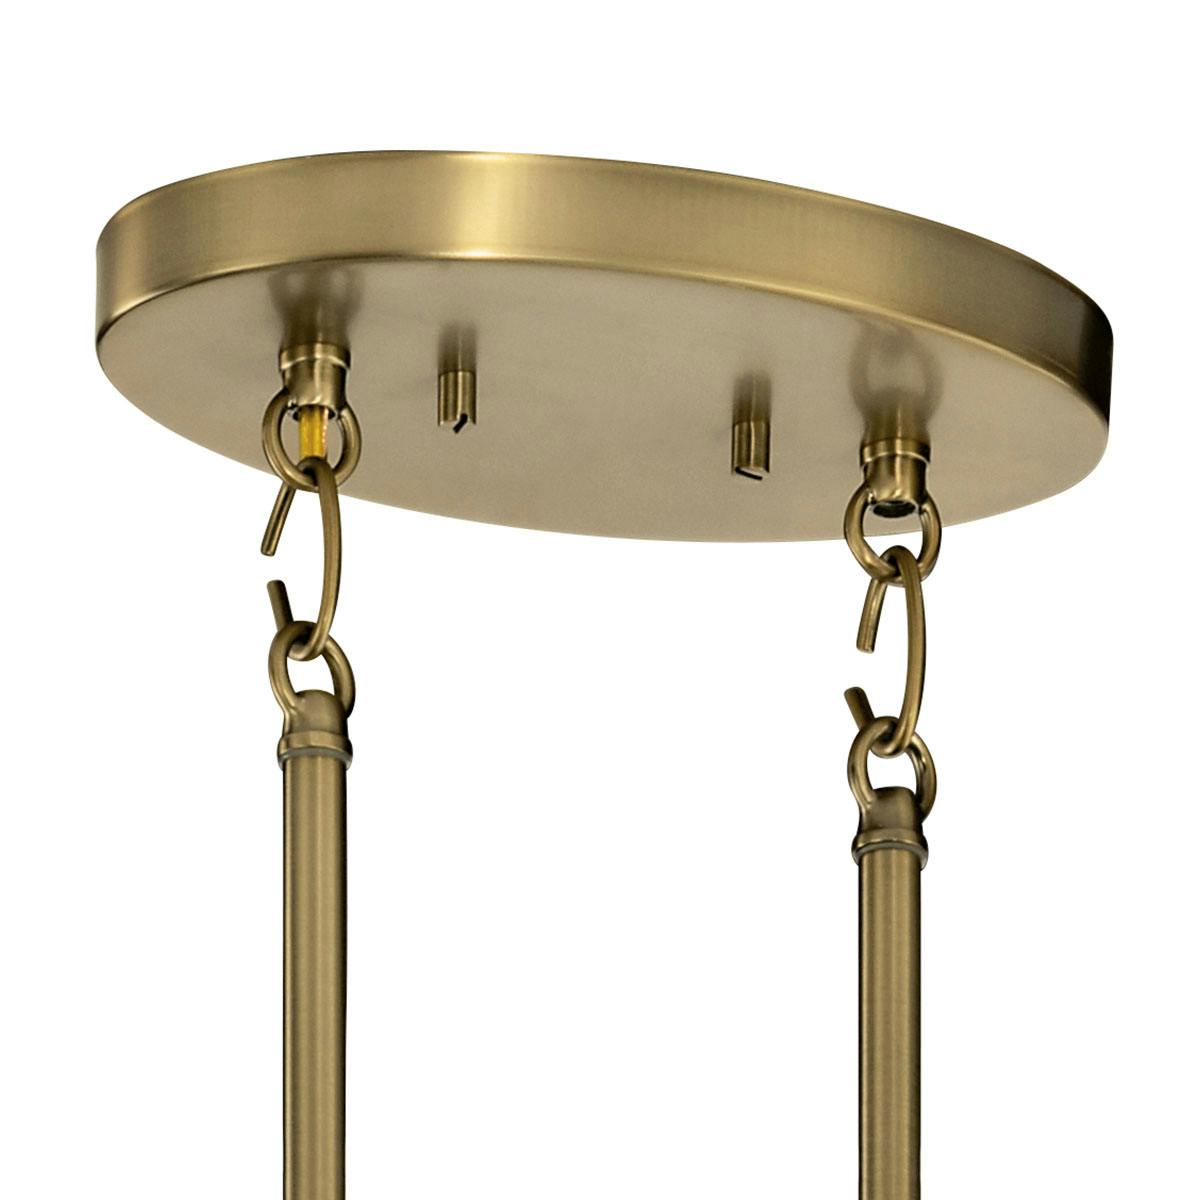 Canopy for the Tolani 8 Light Oval Chandelier Brass on a white background